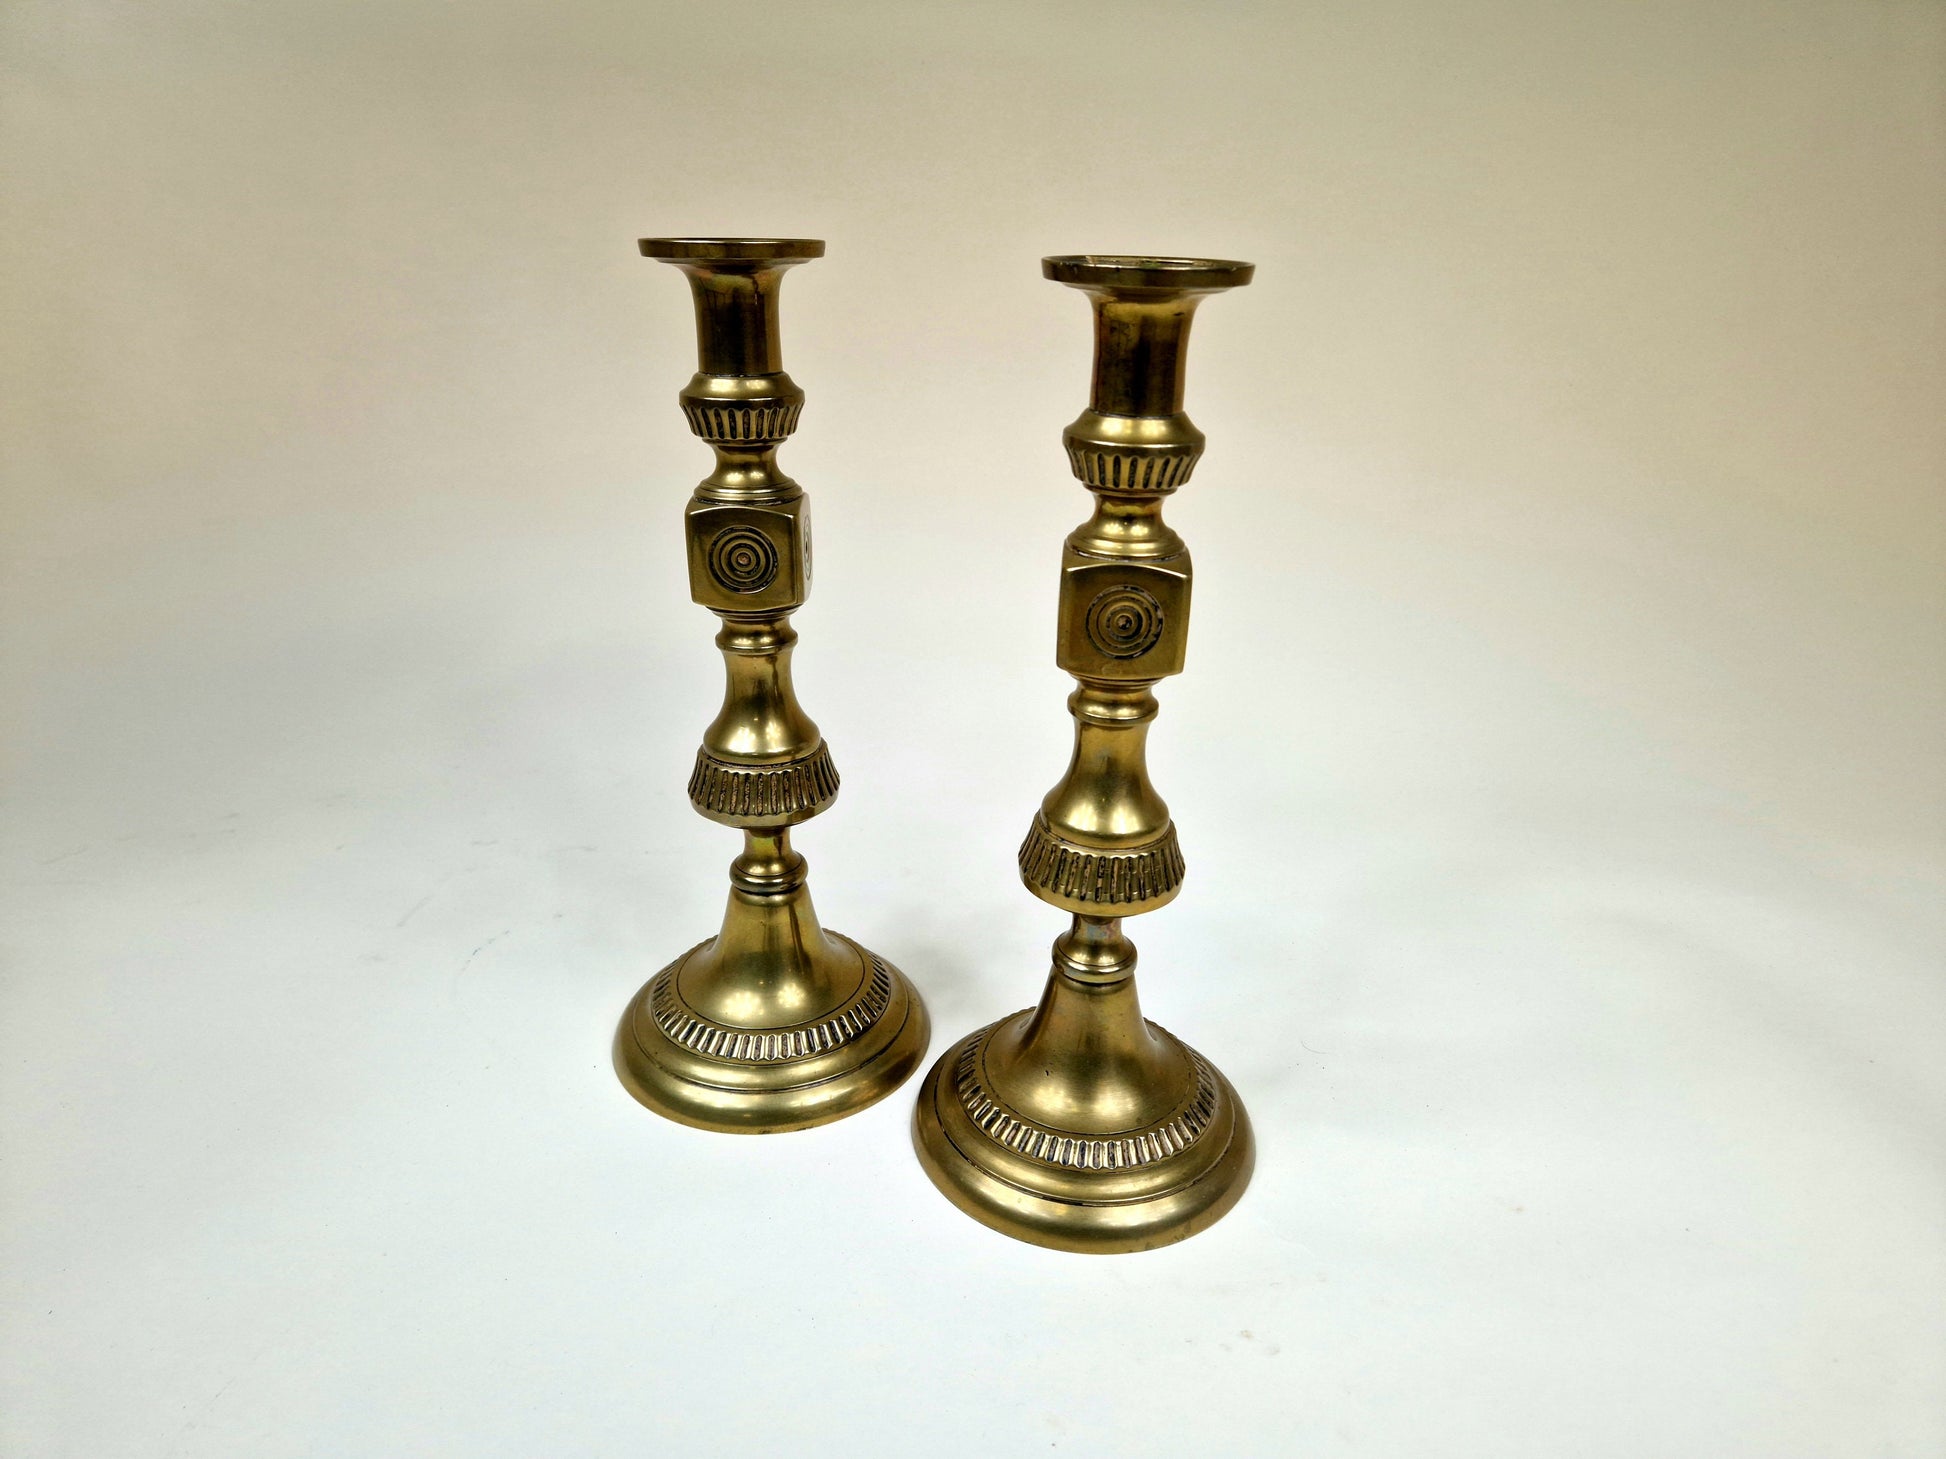 Antique Victorian Brass candle holders with Bullseye Design - Set of 2 –  Hollandia Housewares